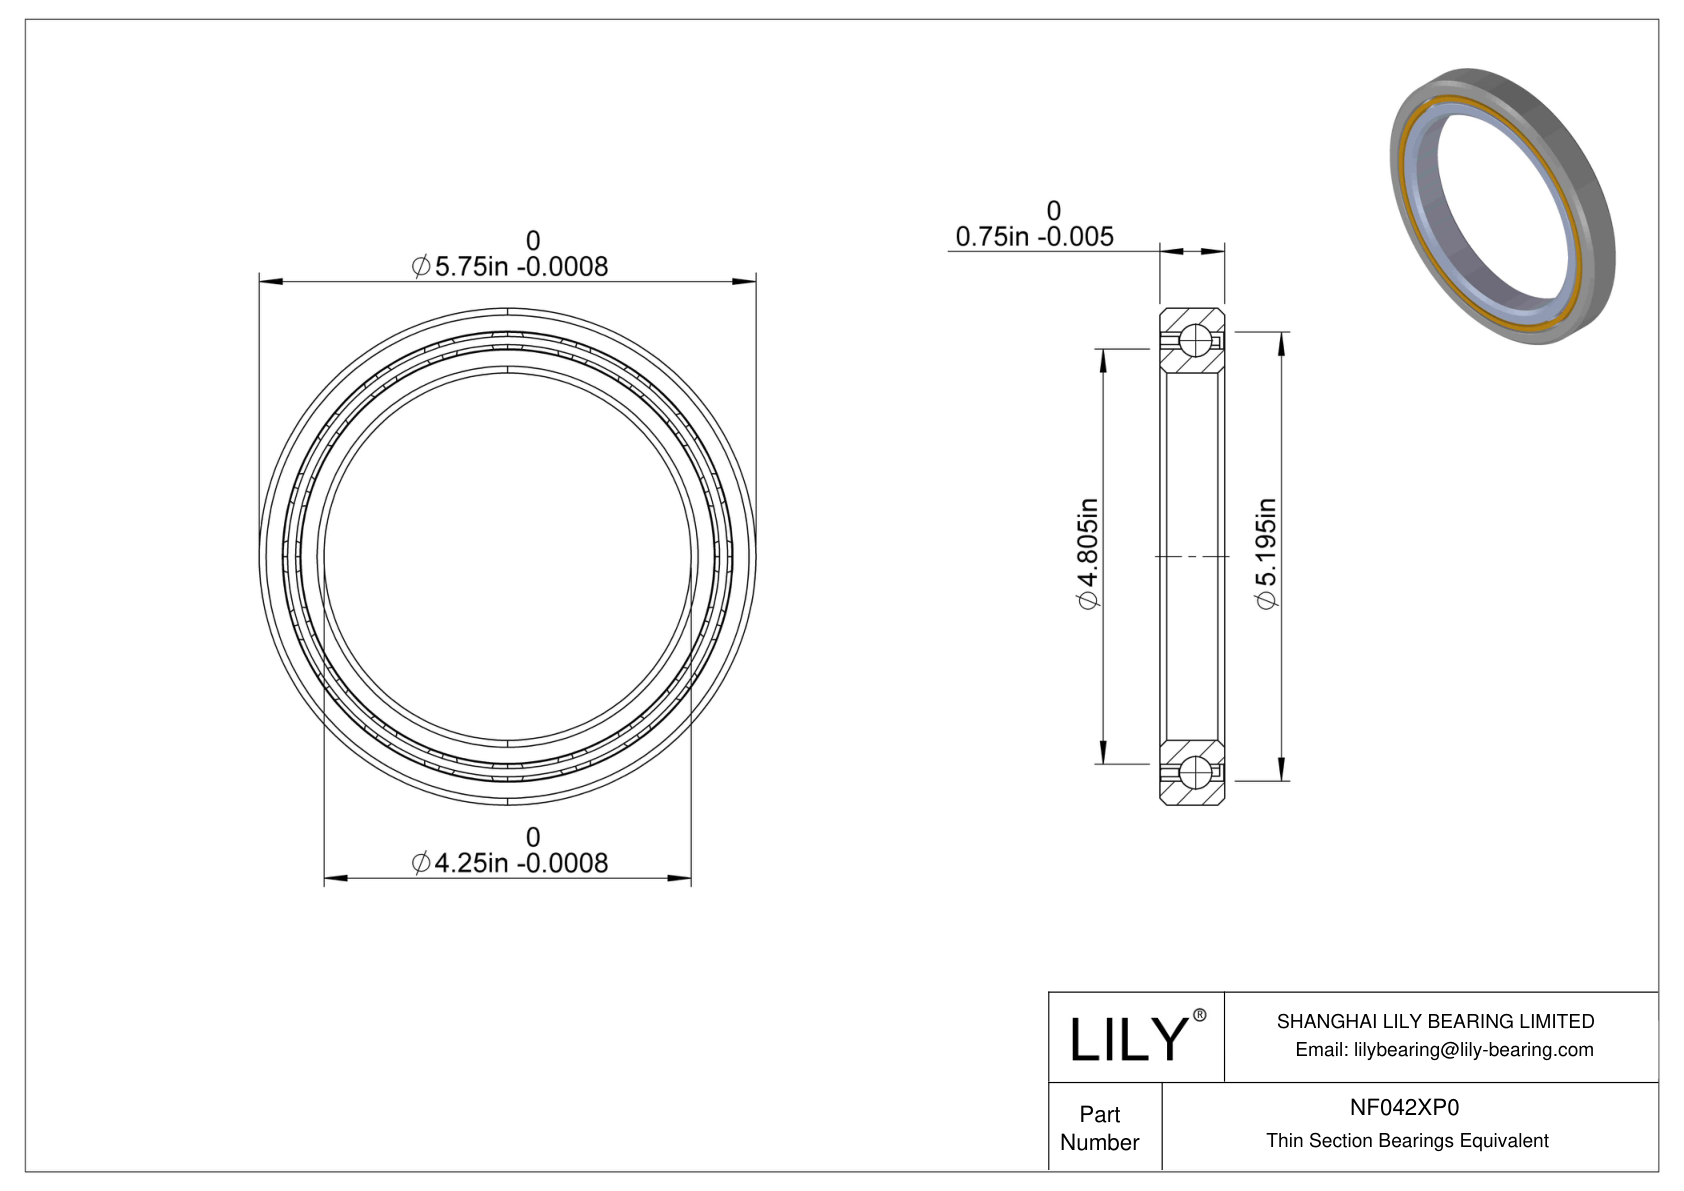 NF042XP0 Constant Section (CS) Bearings cad drawing